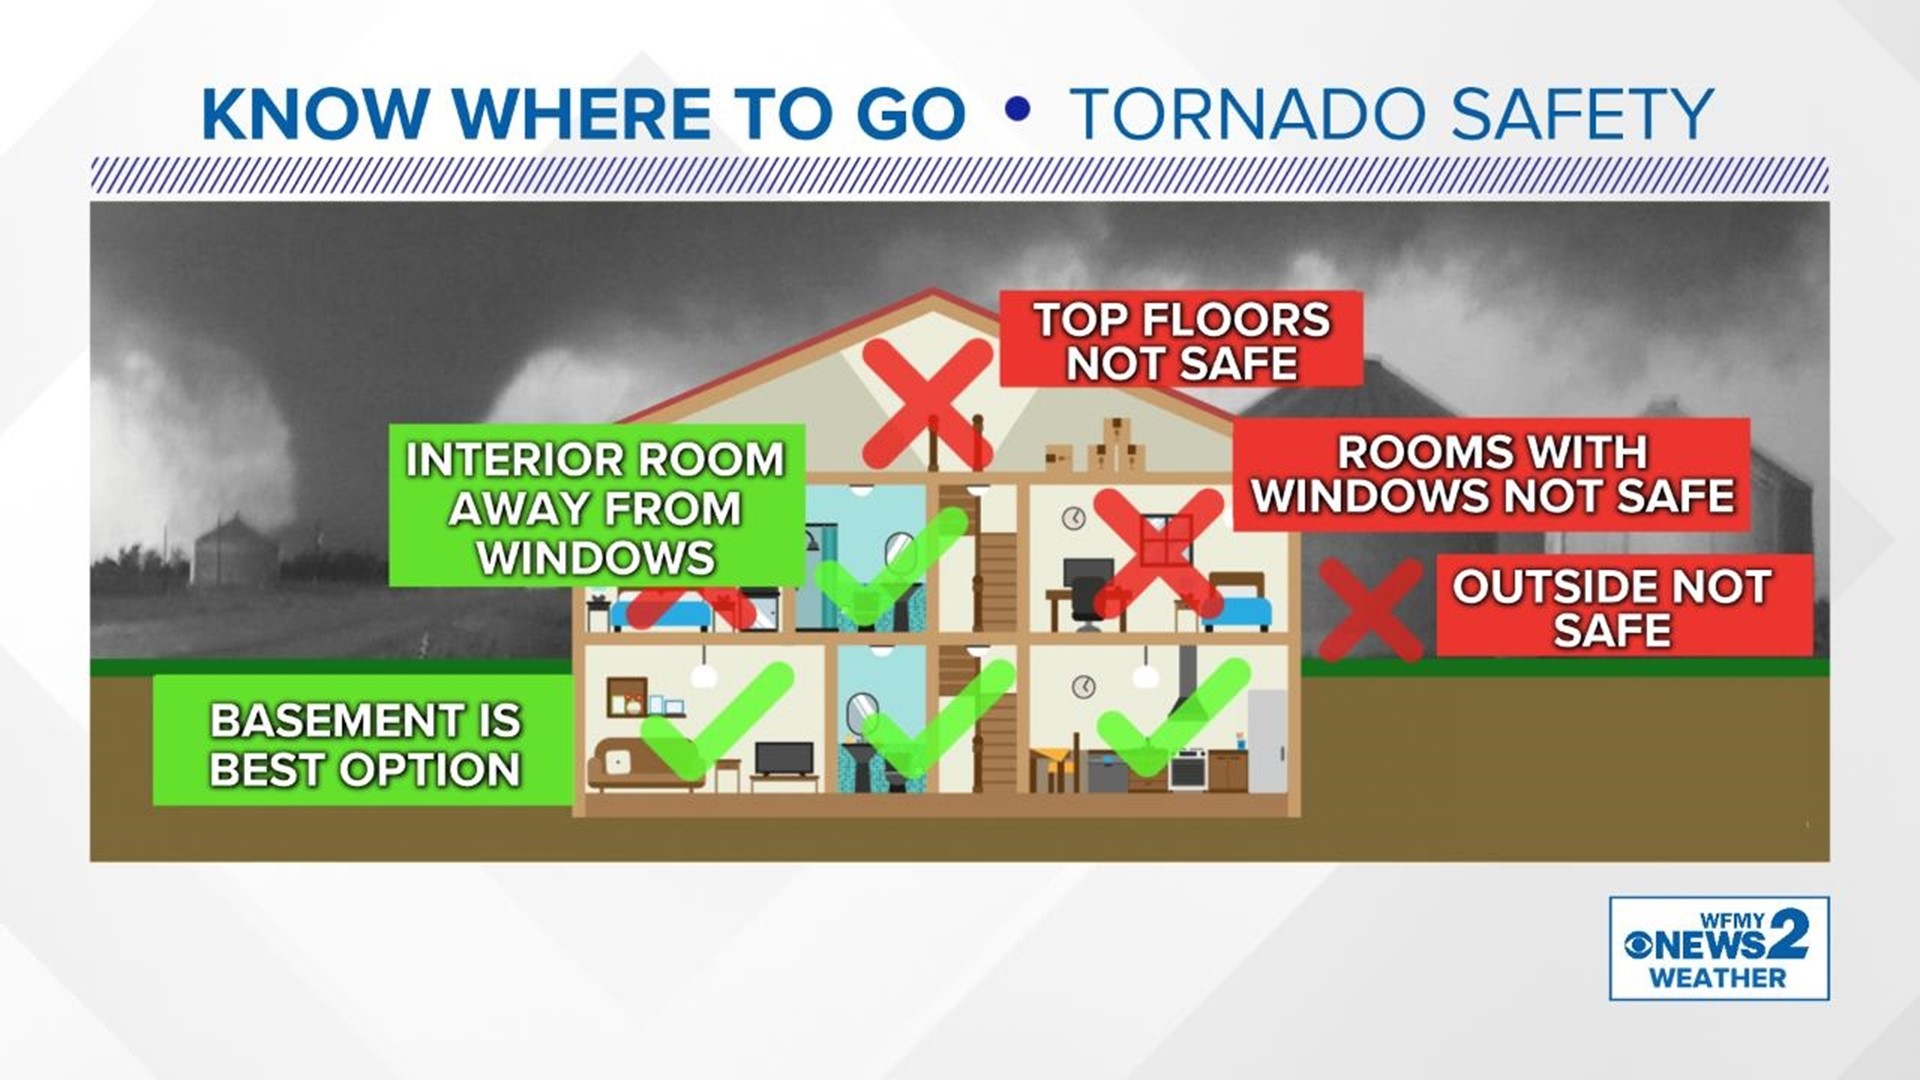 You want to make sure you get to the safest place in the event of a tornado. Here’s what you should do and know to keep safe.